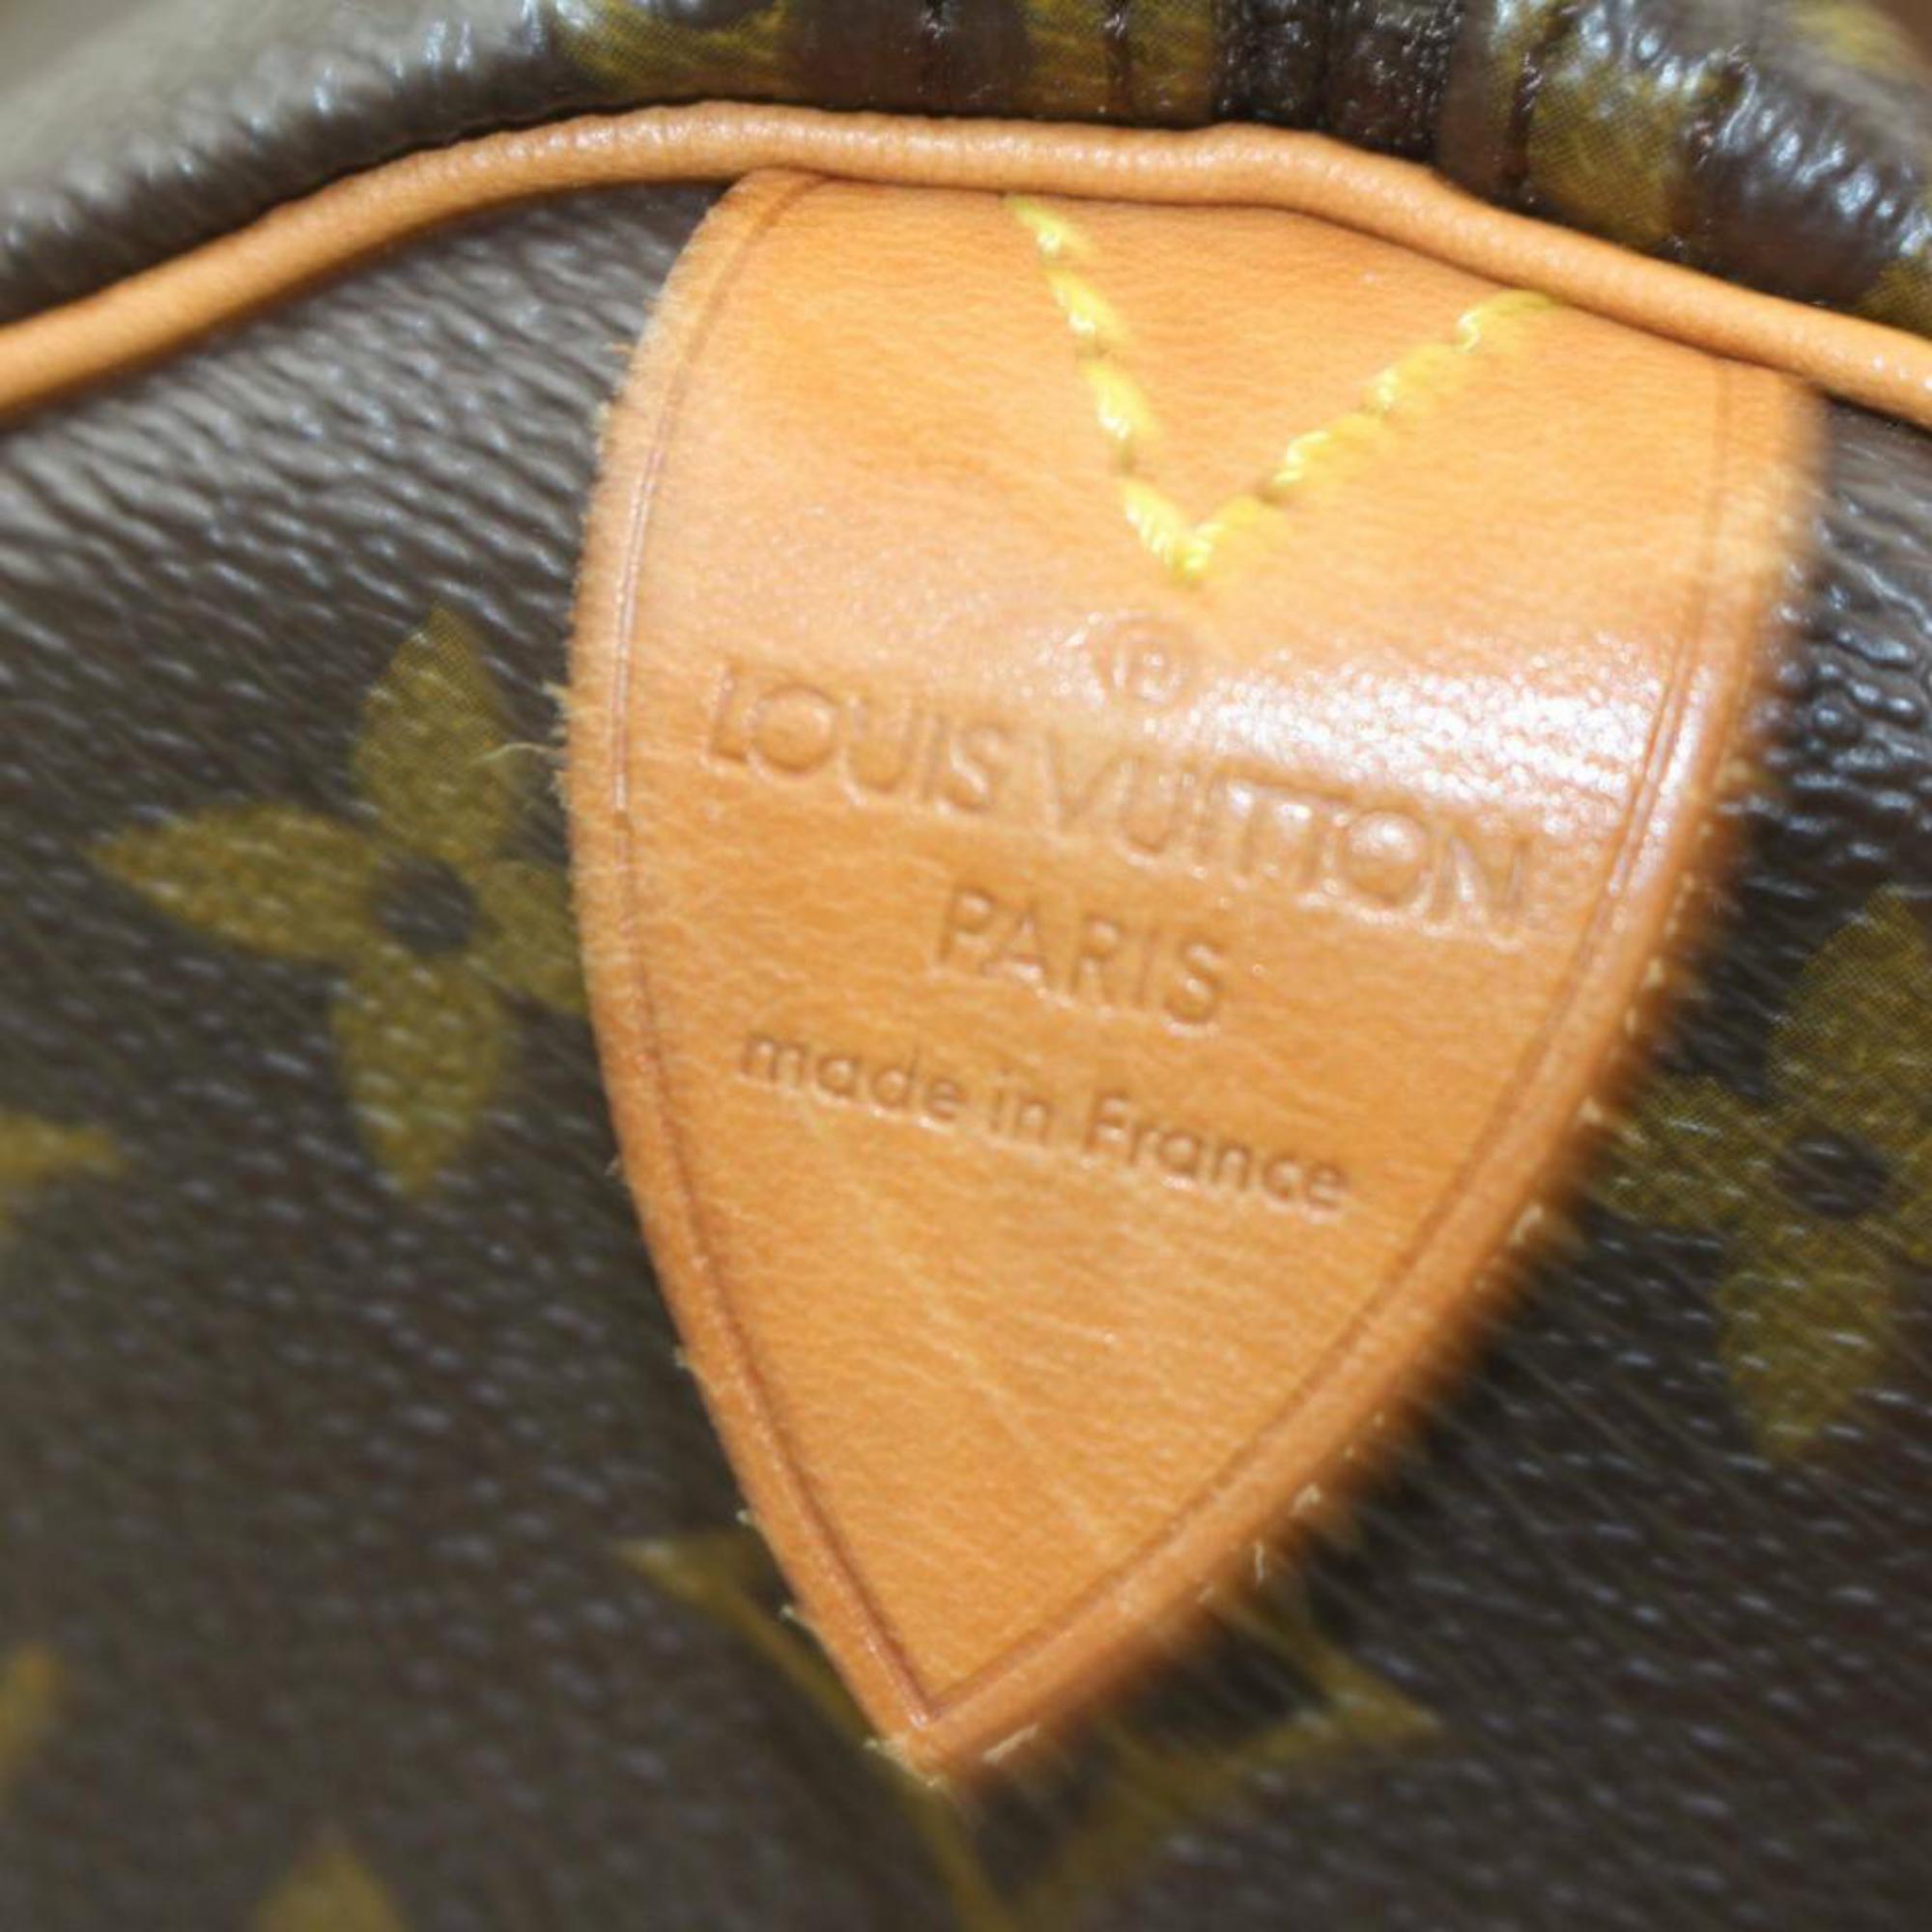 Louis Vuitton Speedy Monogram 25 870171 Brown Coated Canvas Satchel In Excellent Condition For Sale In Forest Hills, NY